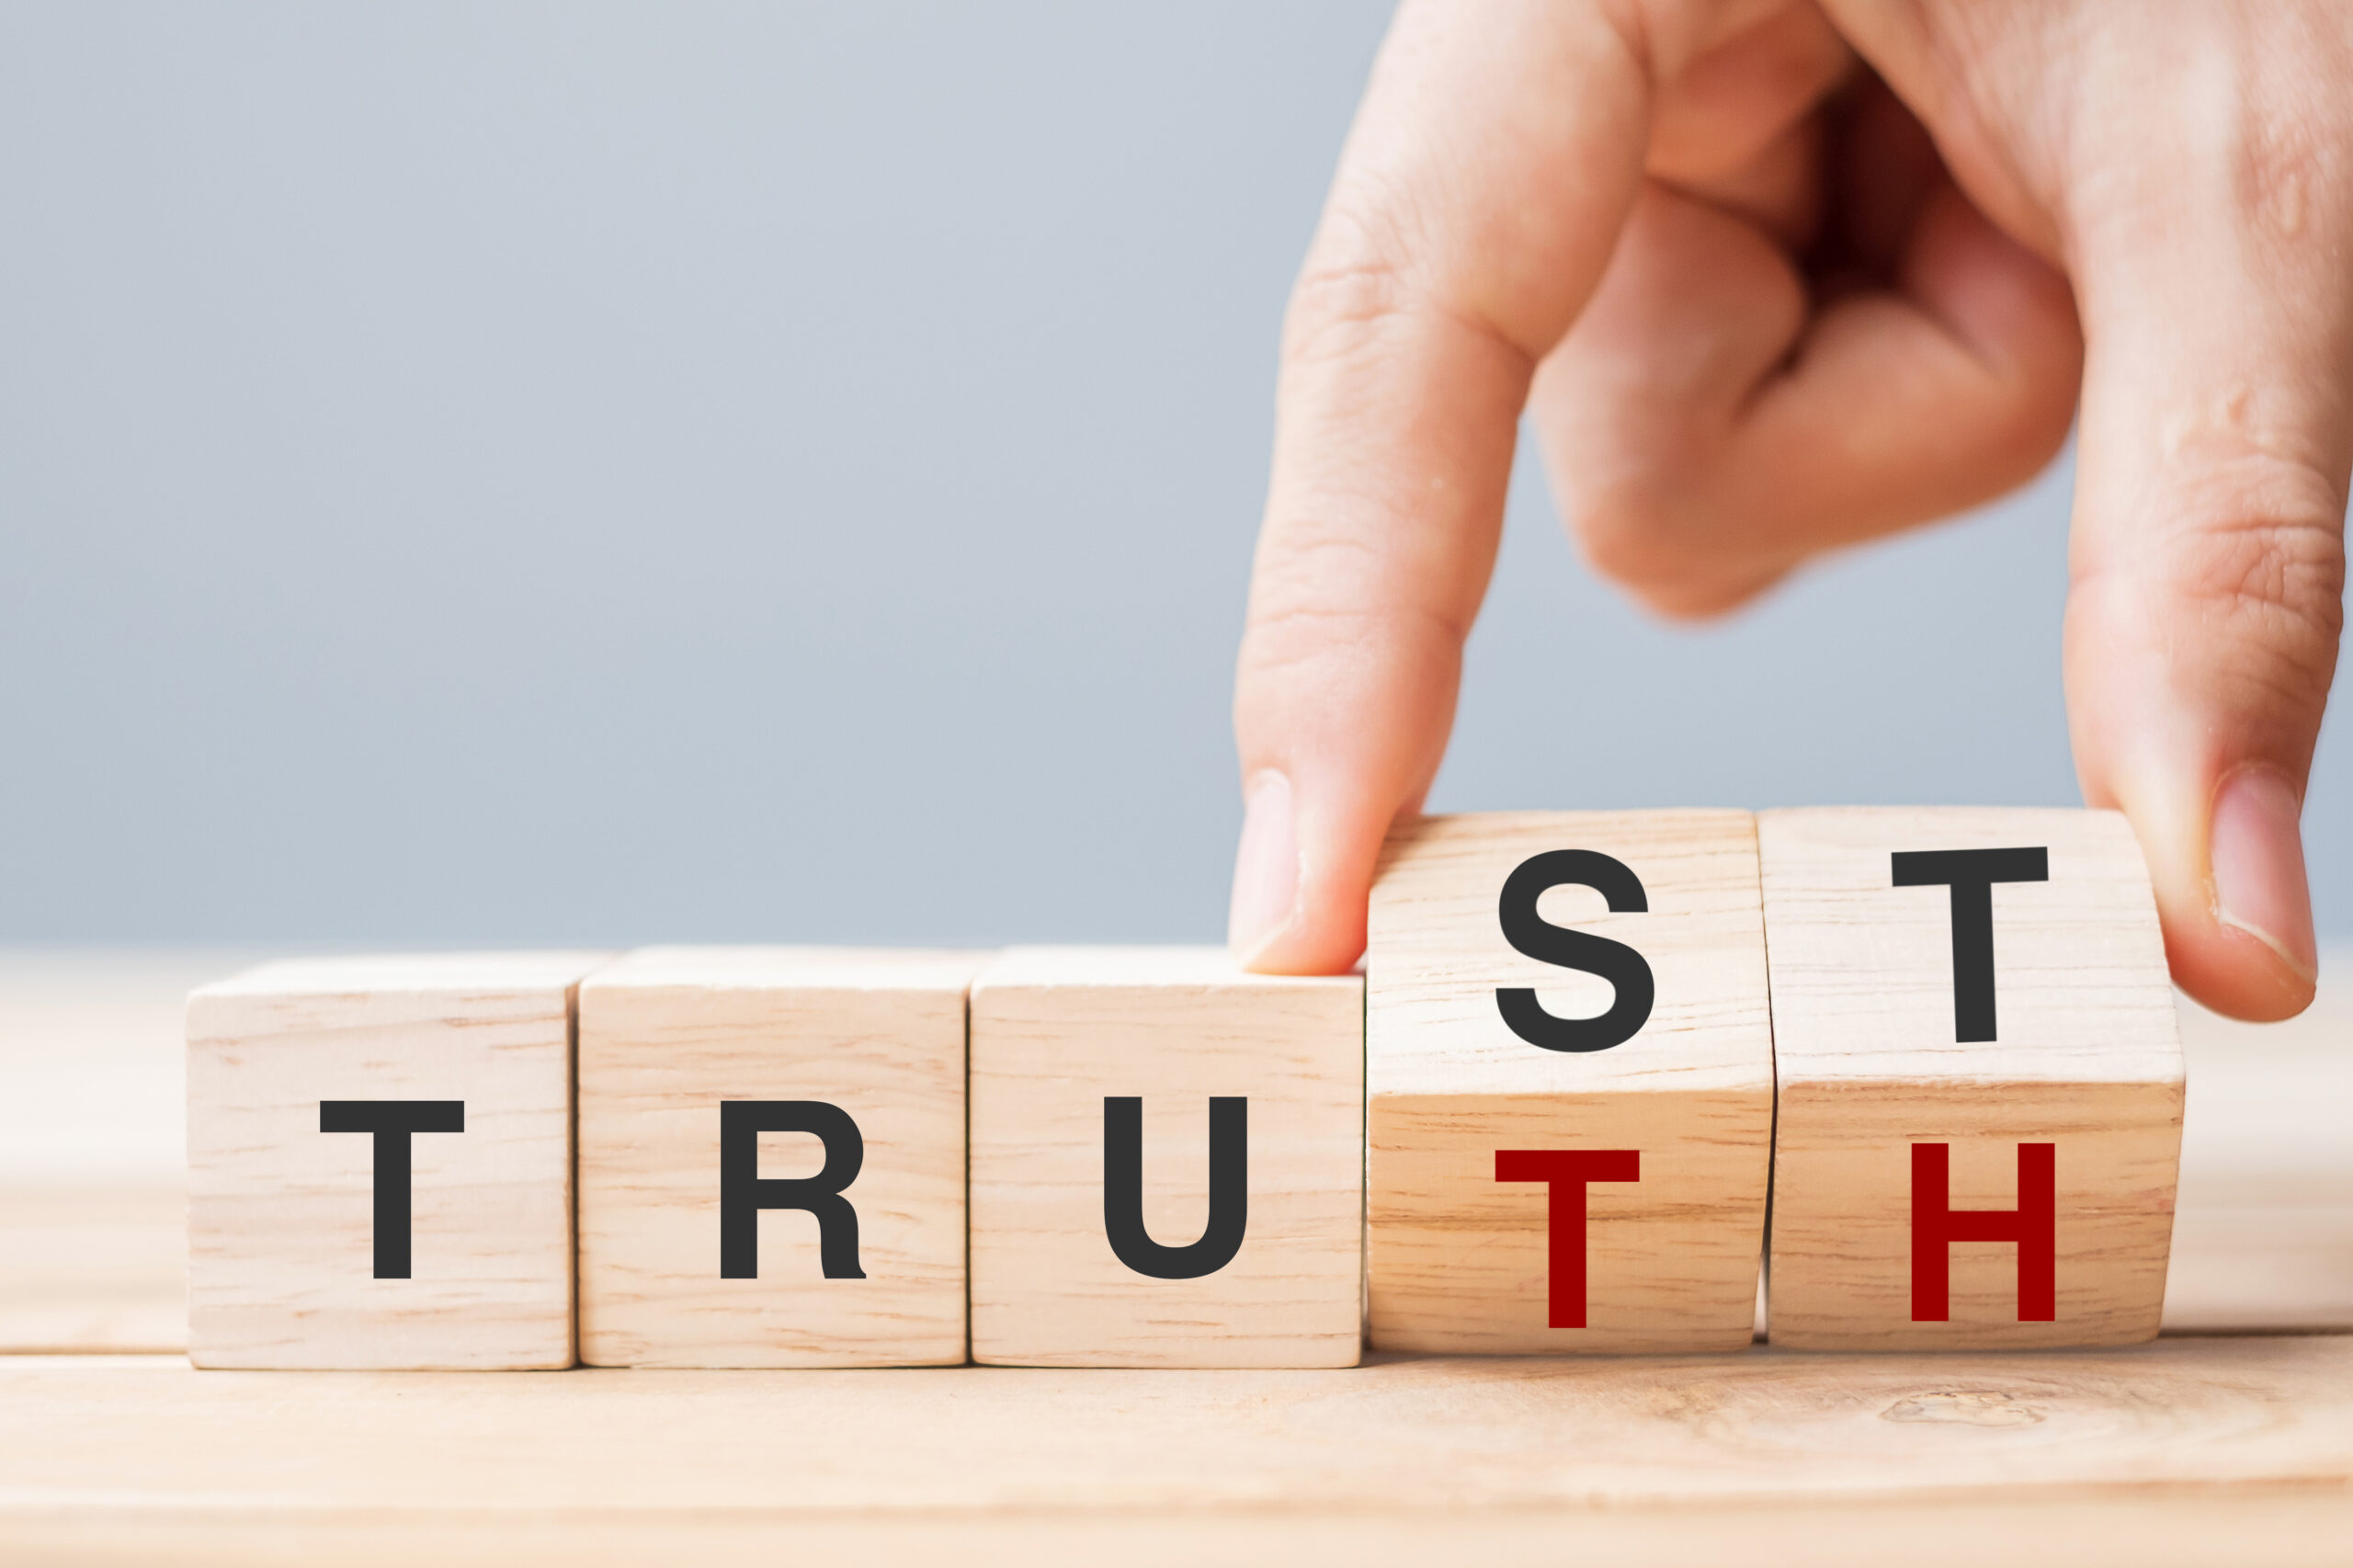 The importance of trust in your insider program